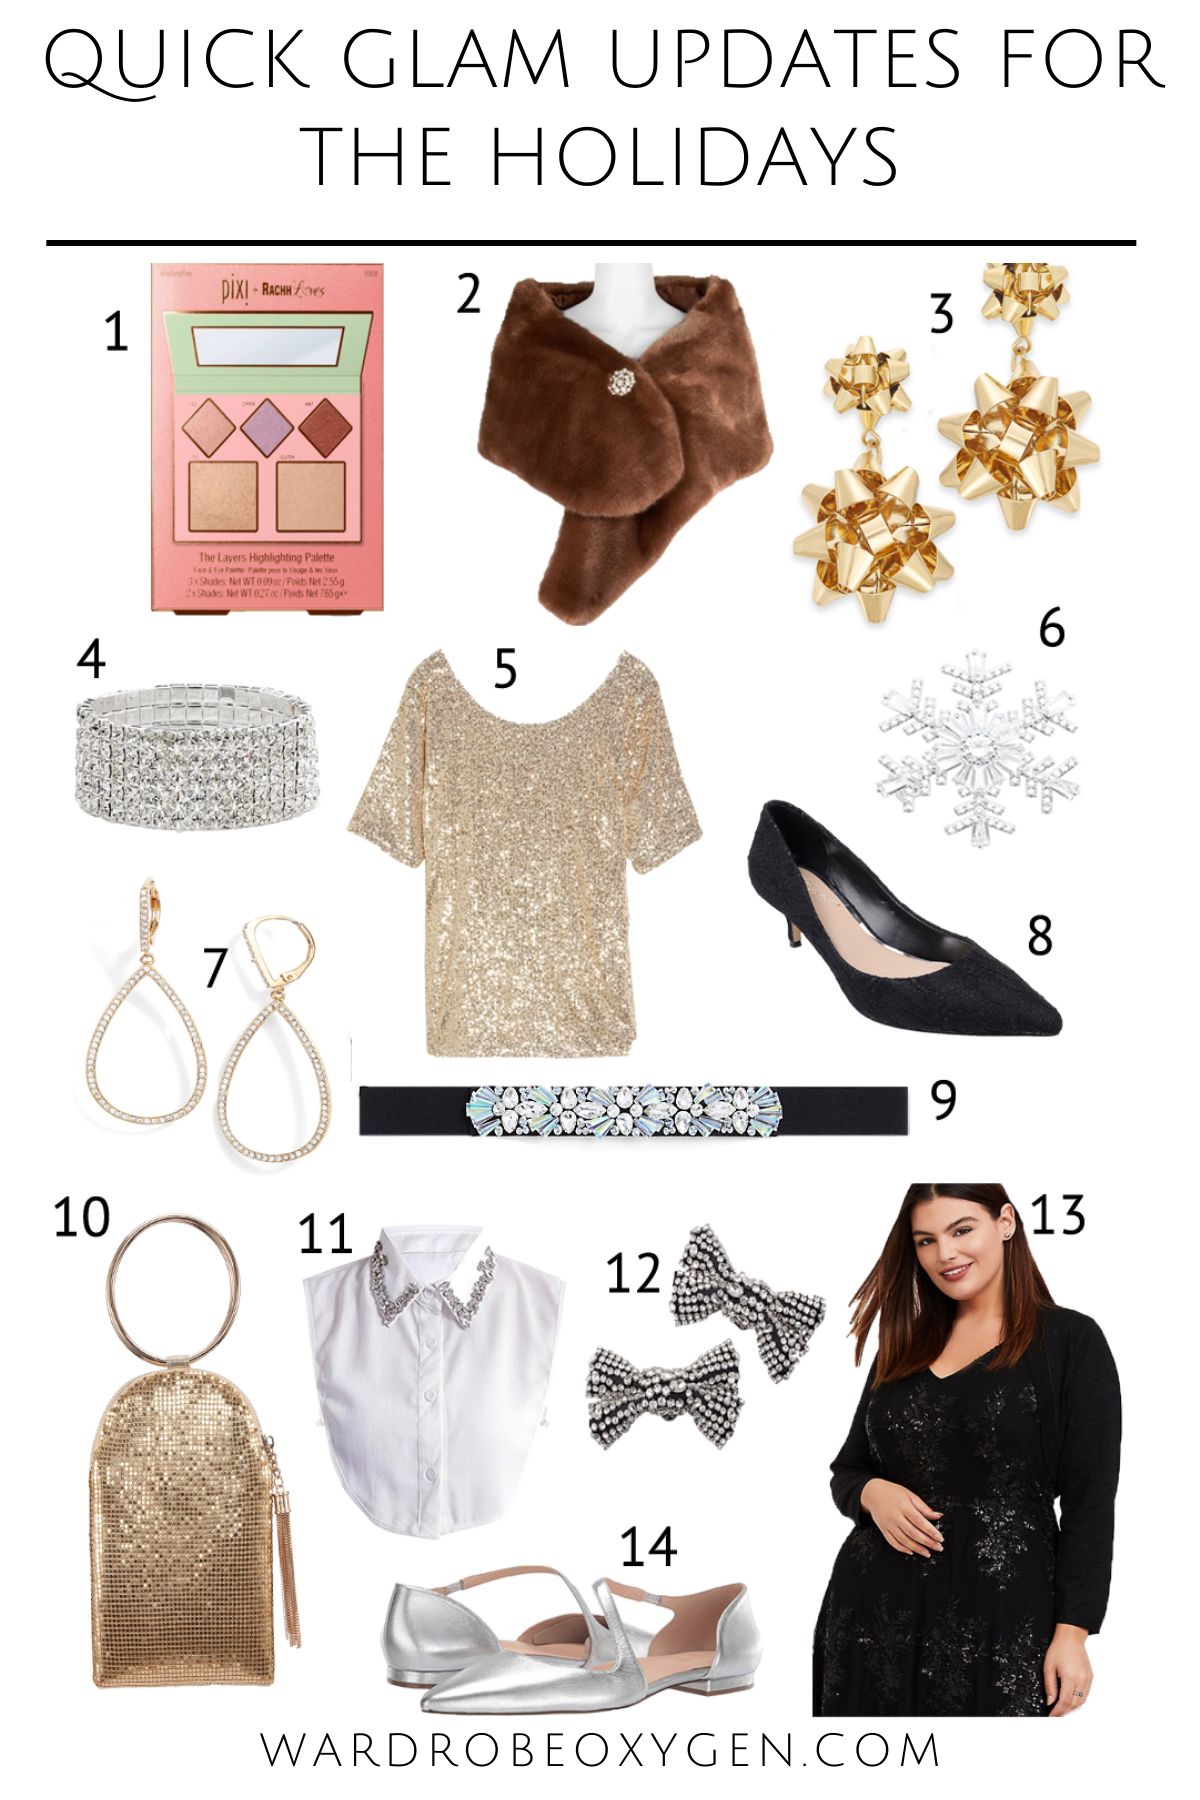 Your Closet Could Use Some Holiday Glam!